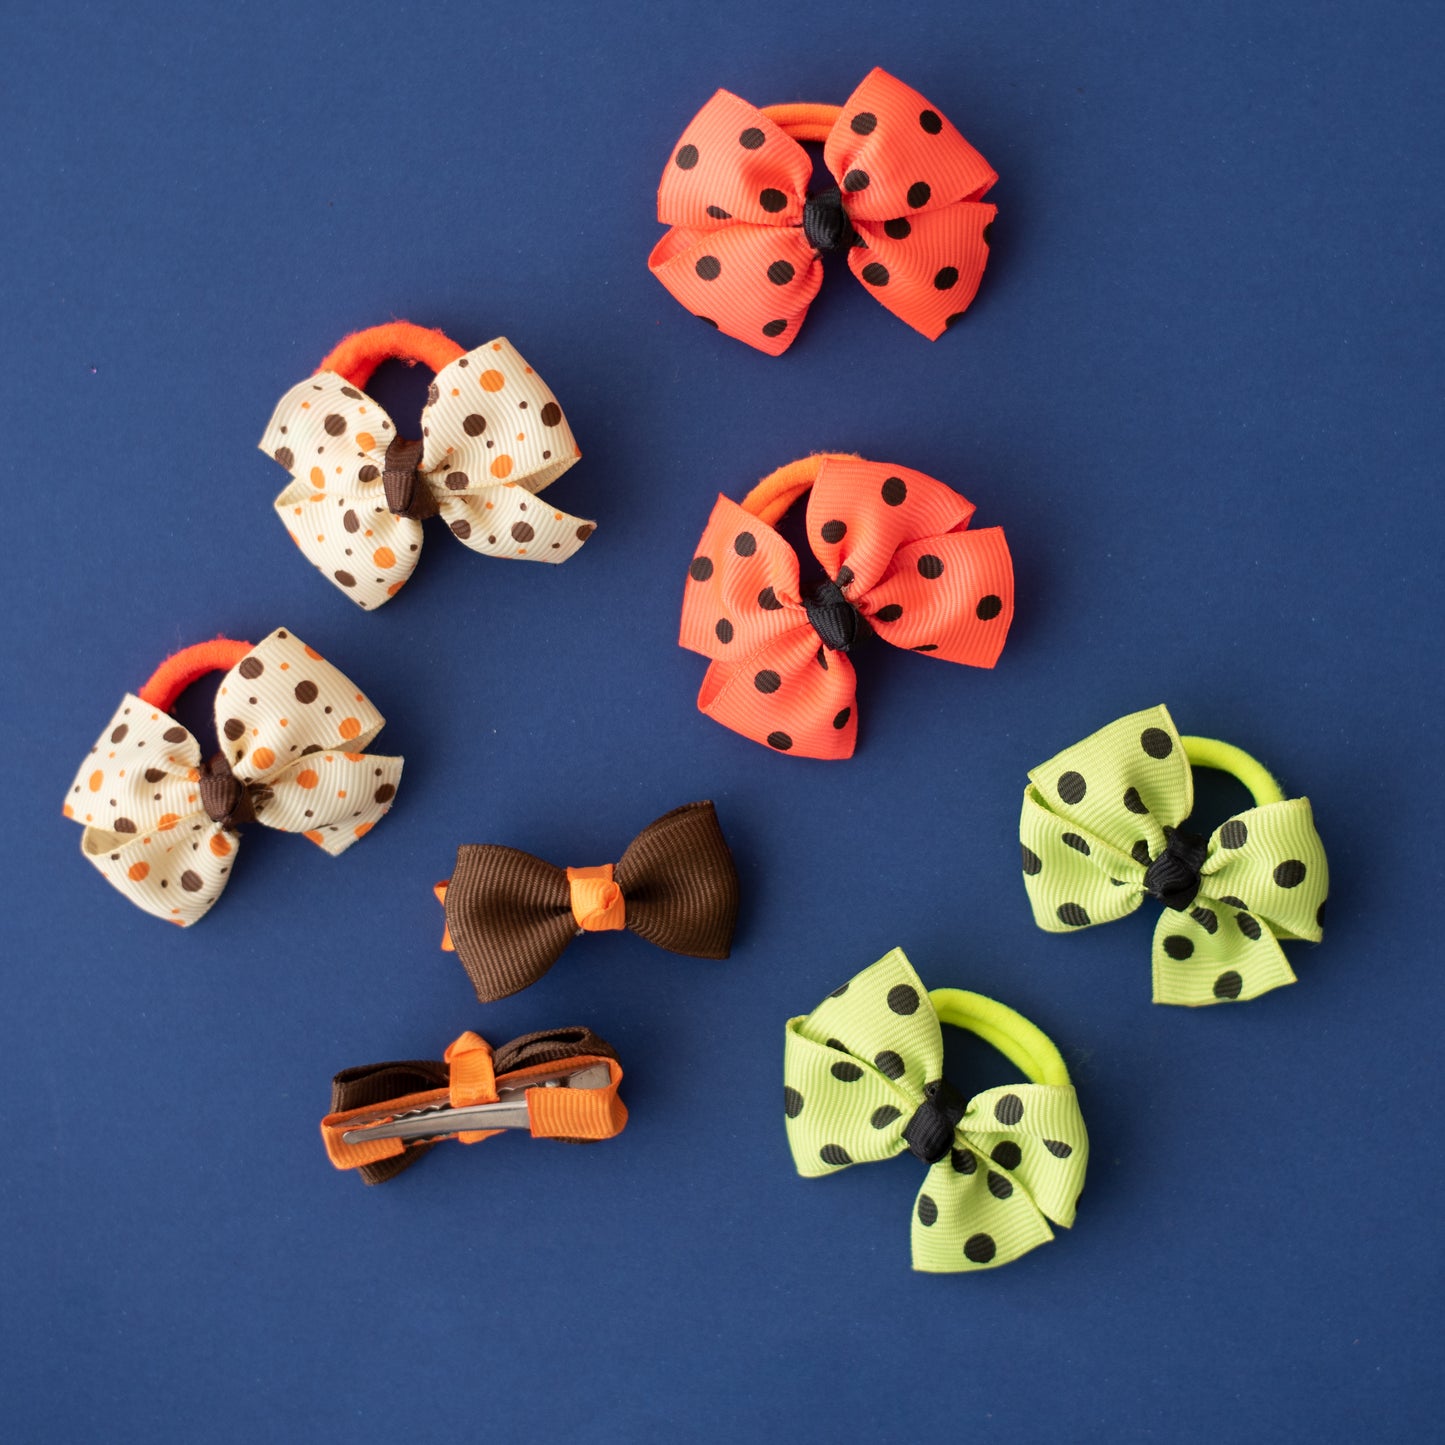 Combo:  One pair of aligator clips and 3 pairs of polka dotted rubberbands - Brown, Off White, Orange, Fluoroscent Green